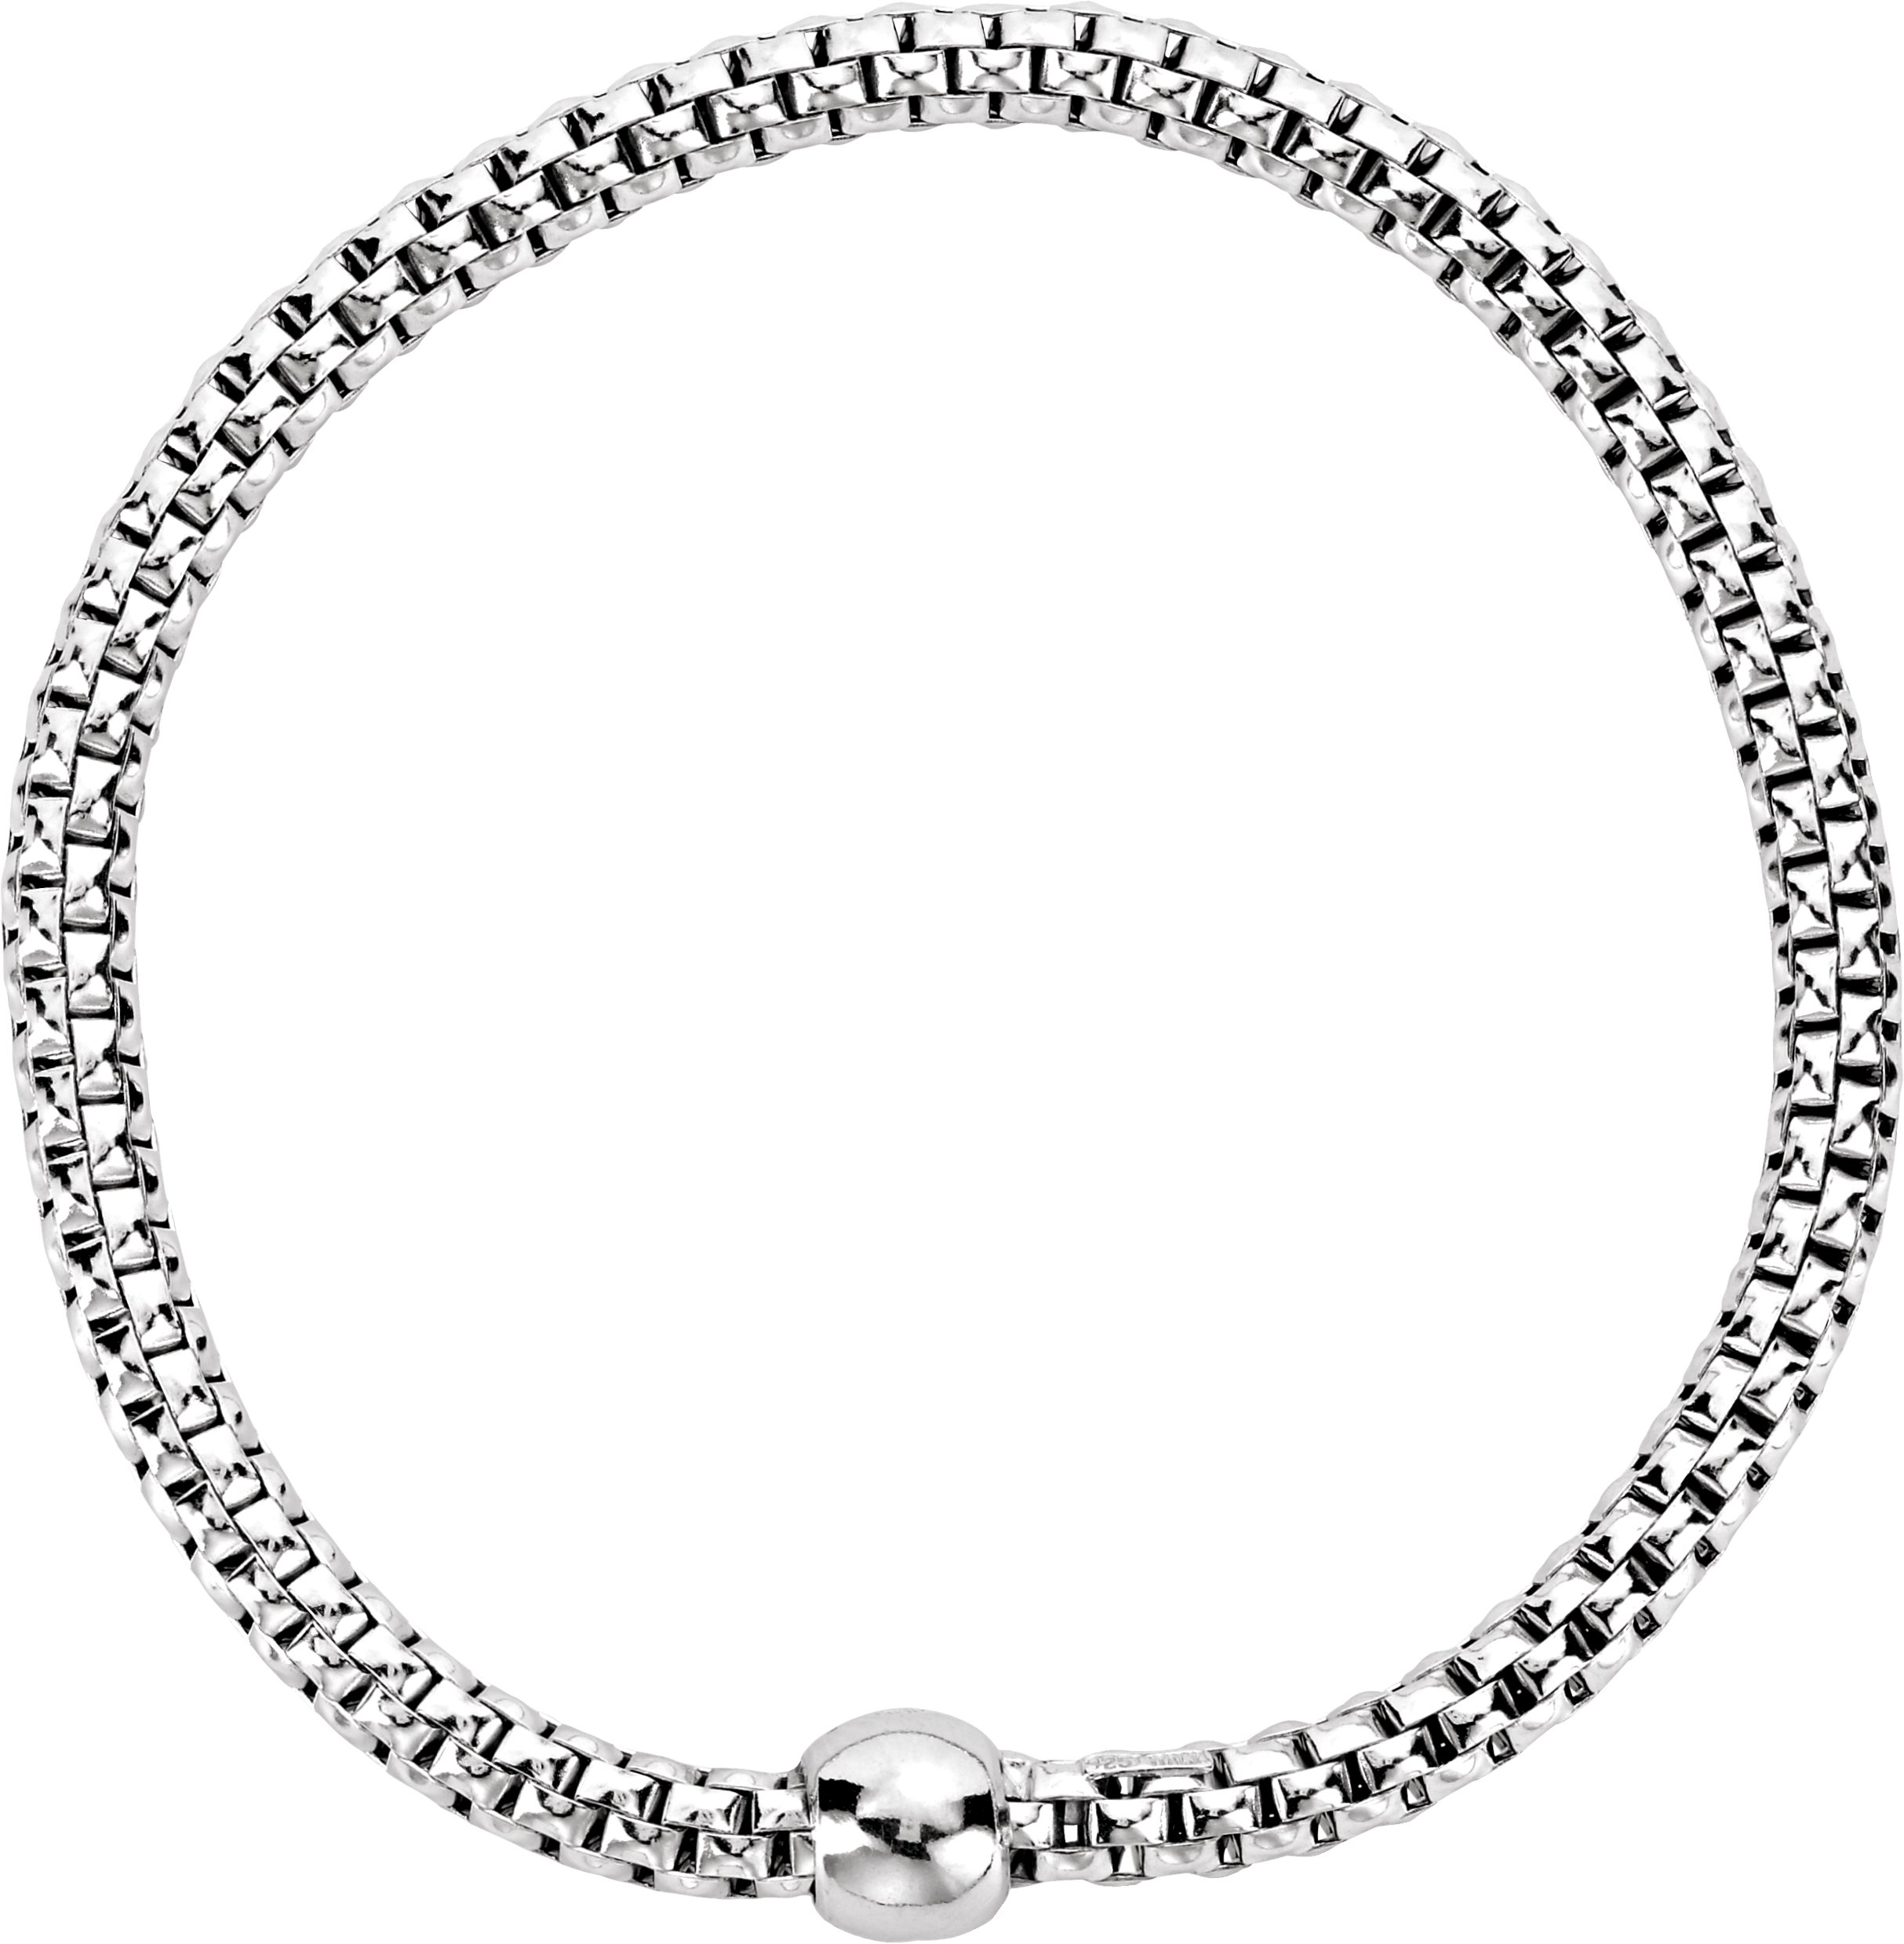 Rhodium-Plated Sterling Silver 4.3 mm Woven Stretch Bracelet